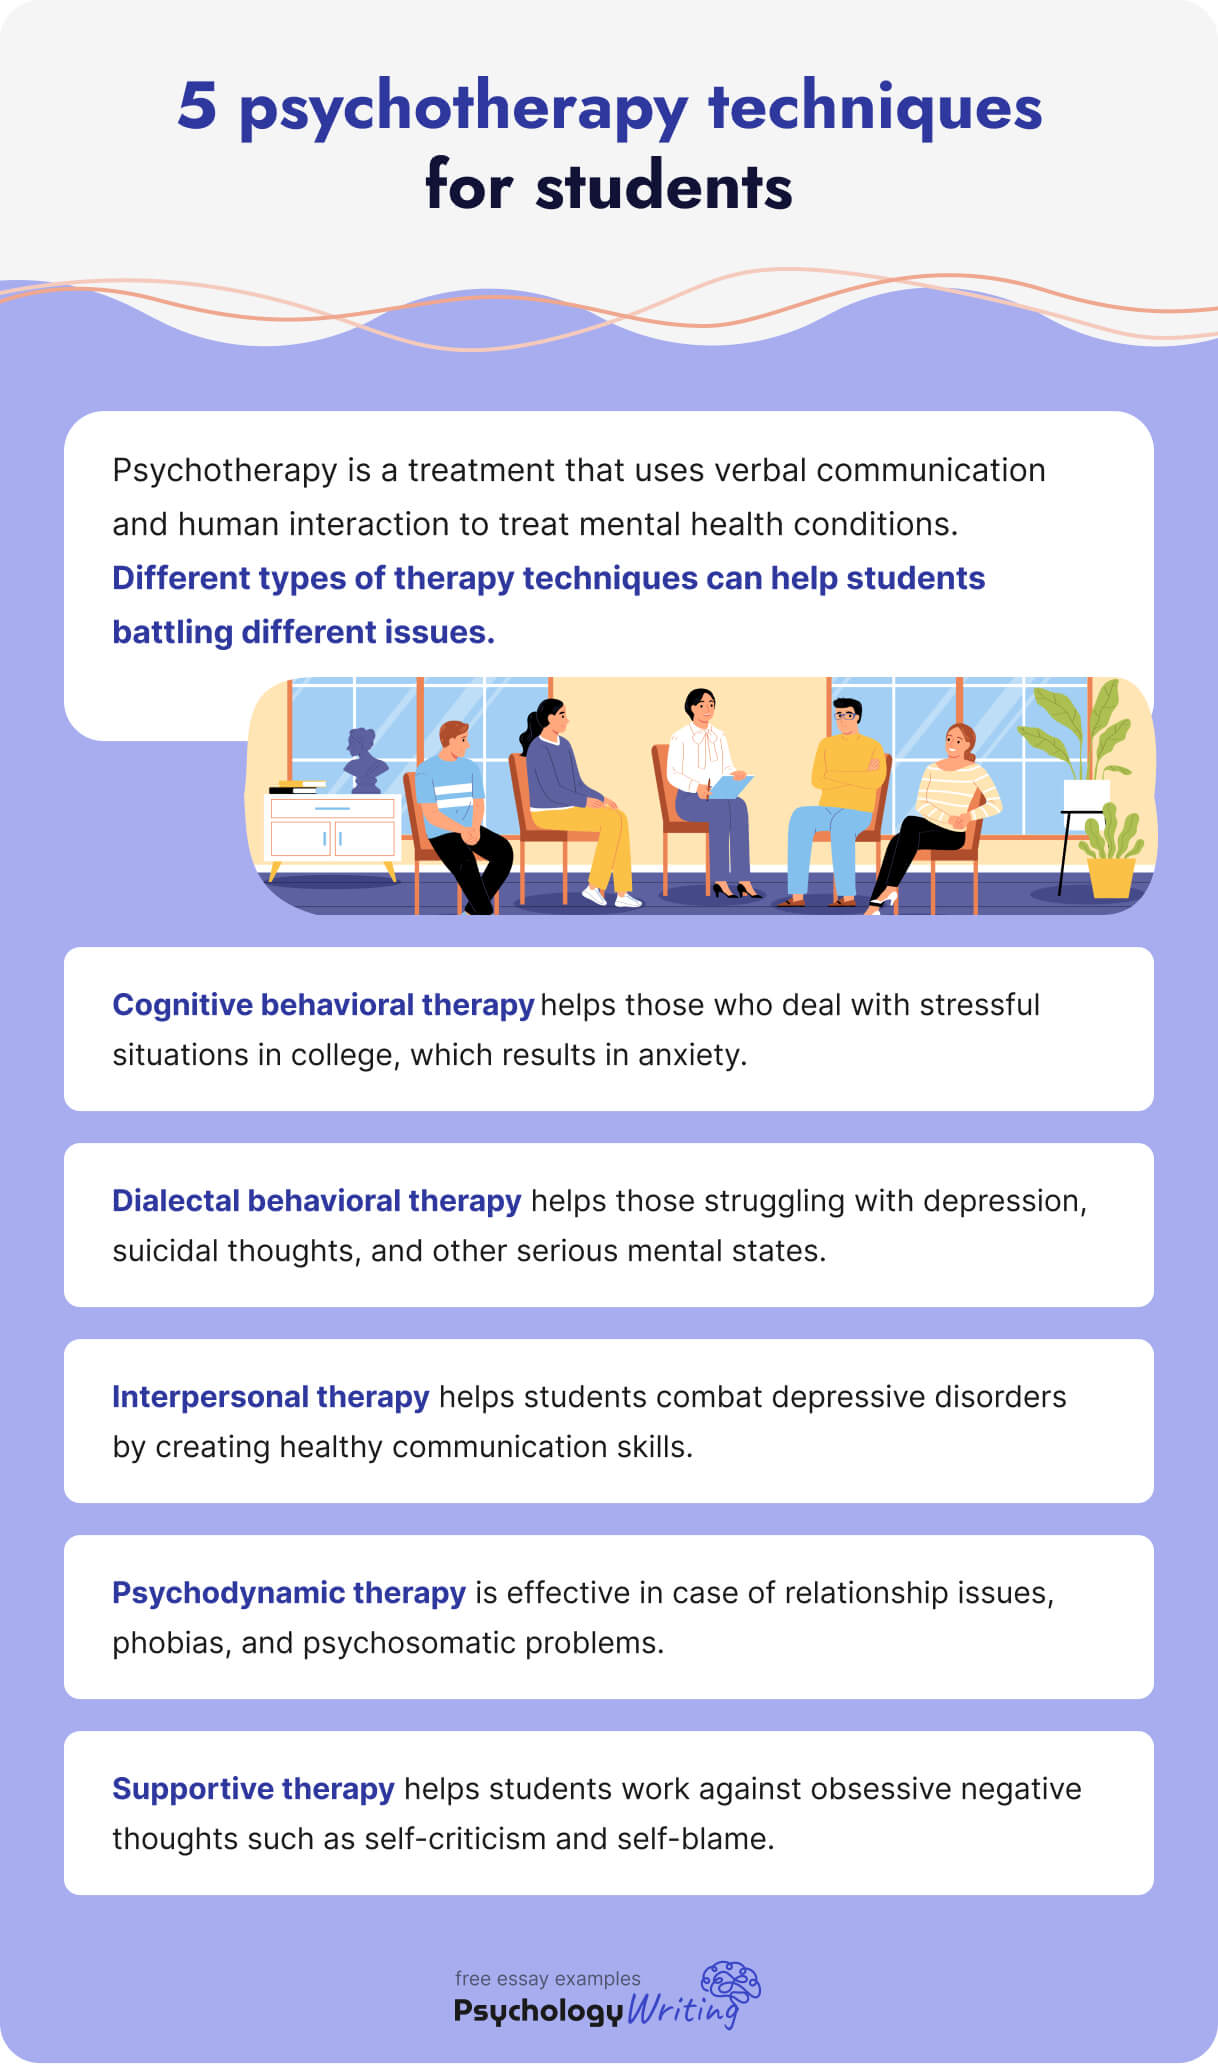 The picture describes five psychotherapy techniques for students.